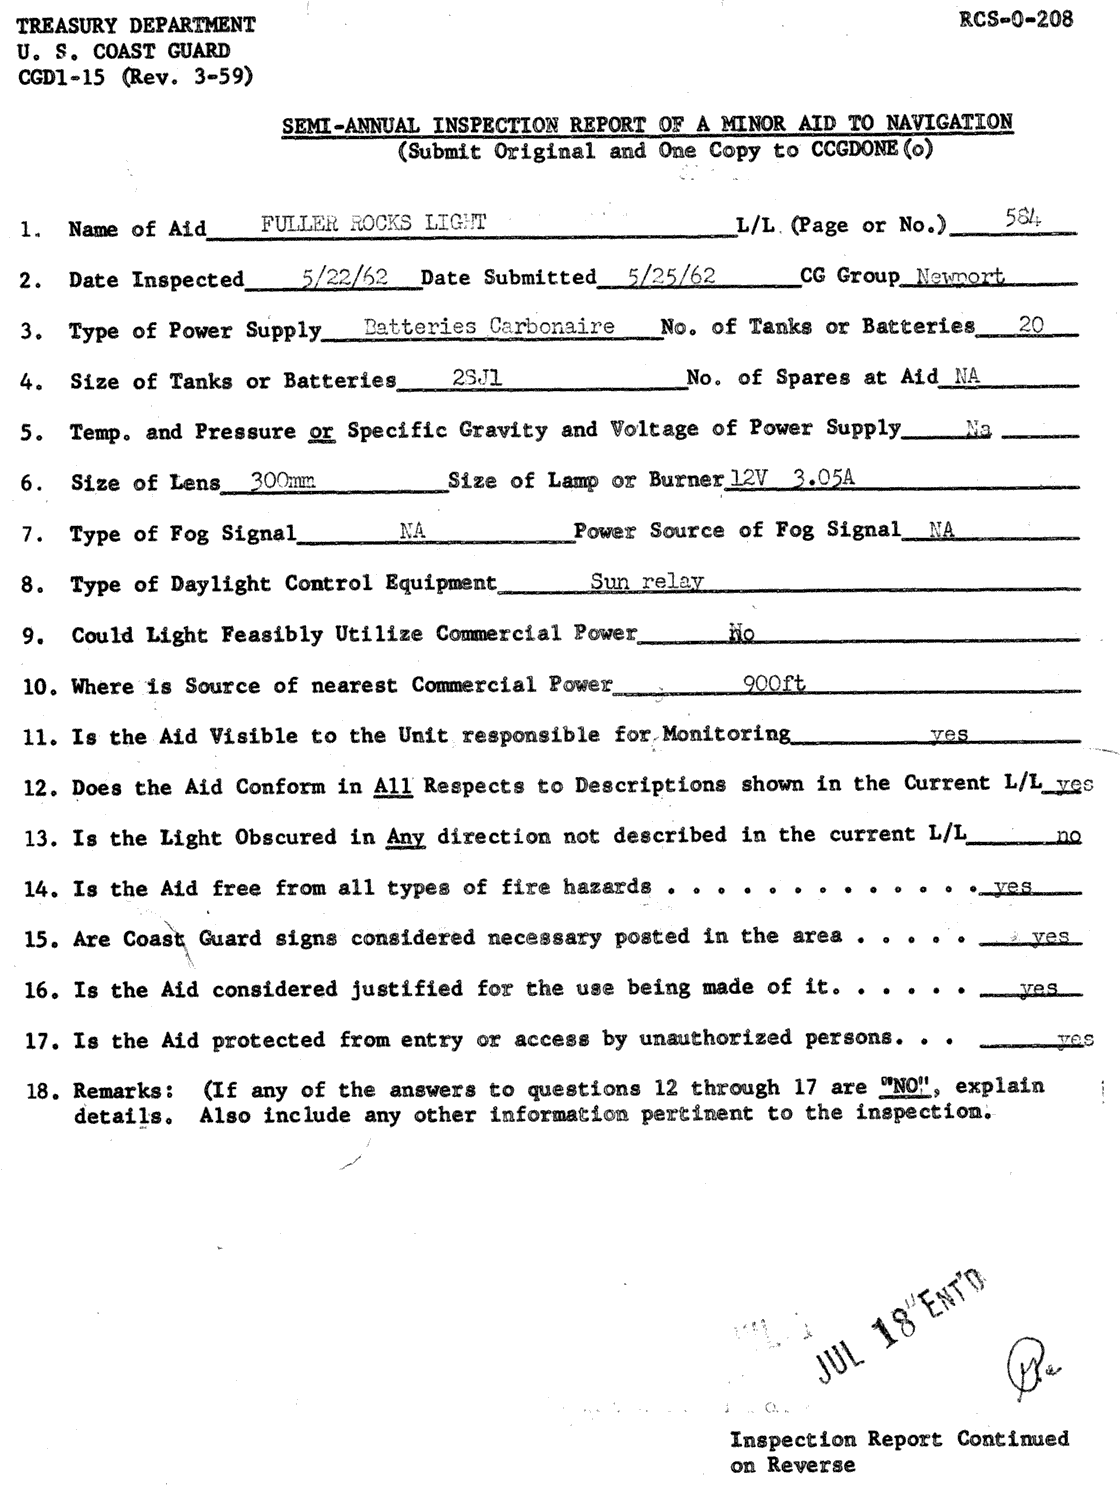 Fuller Rock Light - Semiannual Inspection Report of Minor Aid to Navigation 5/22/62